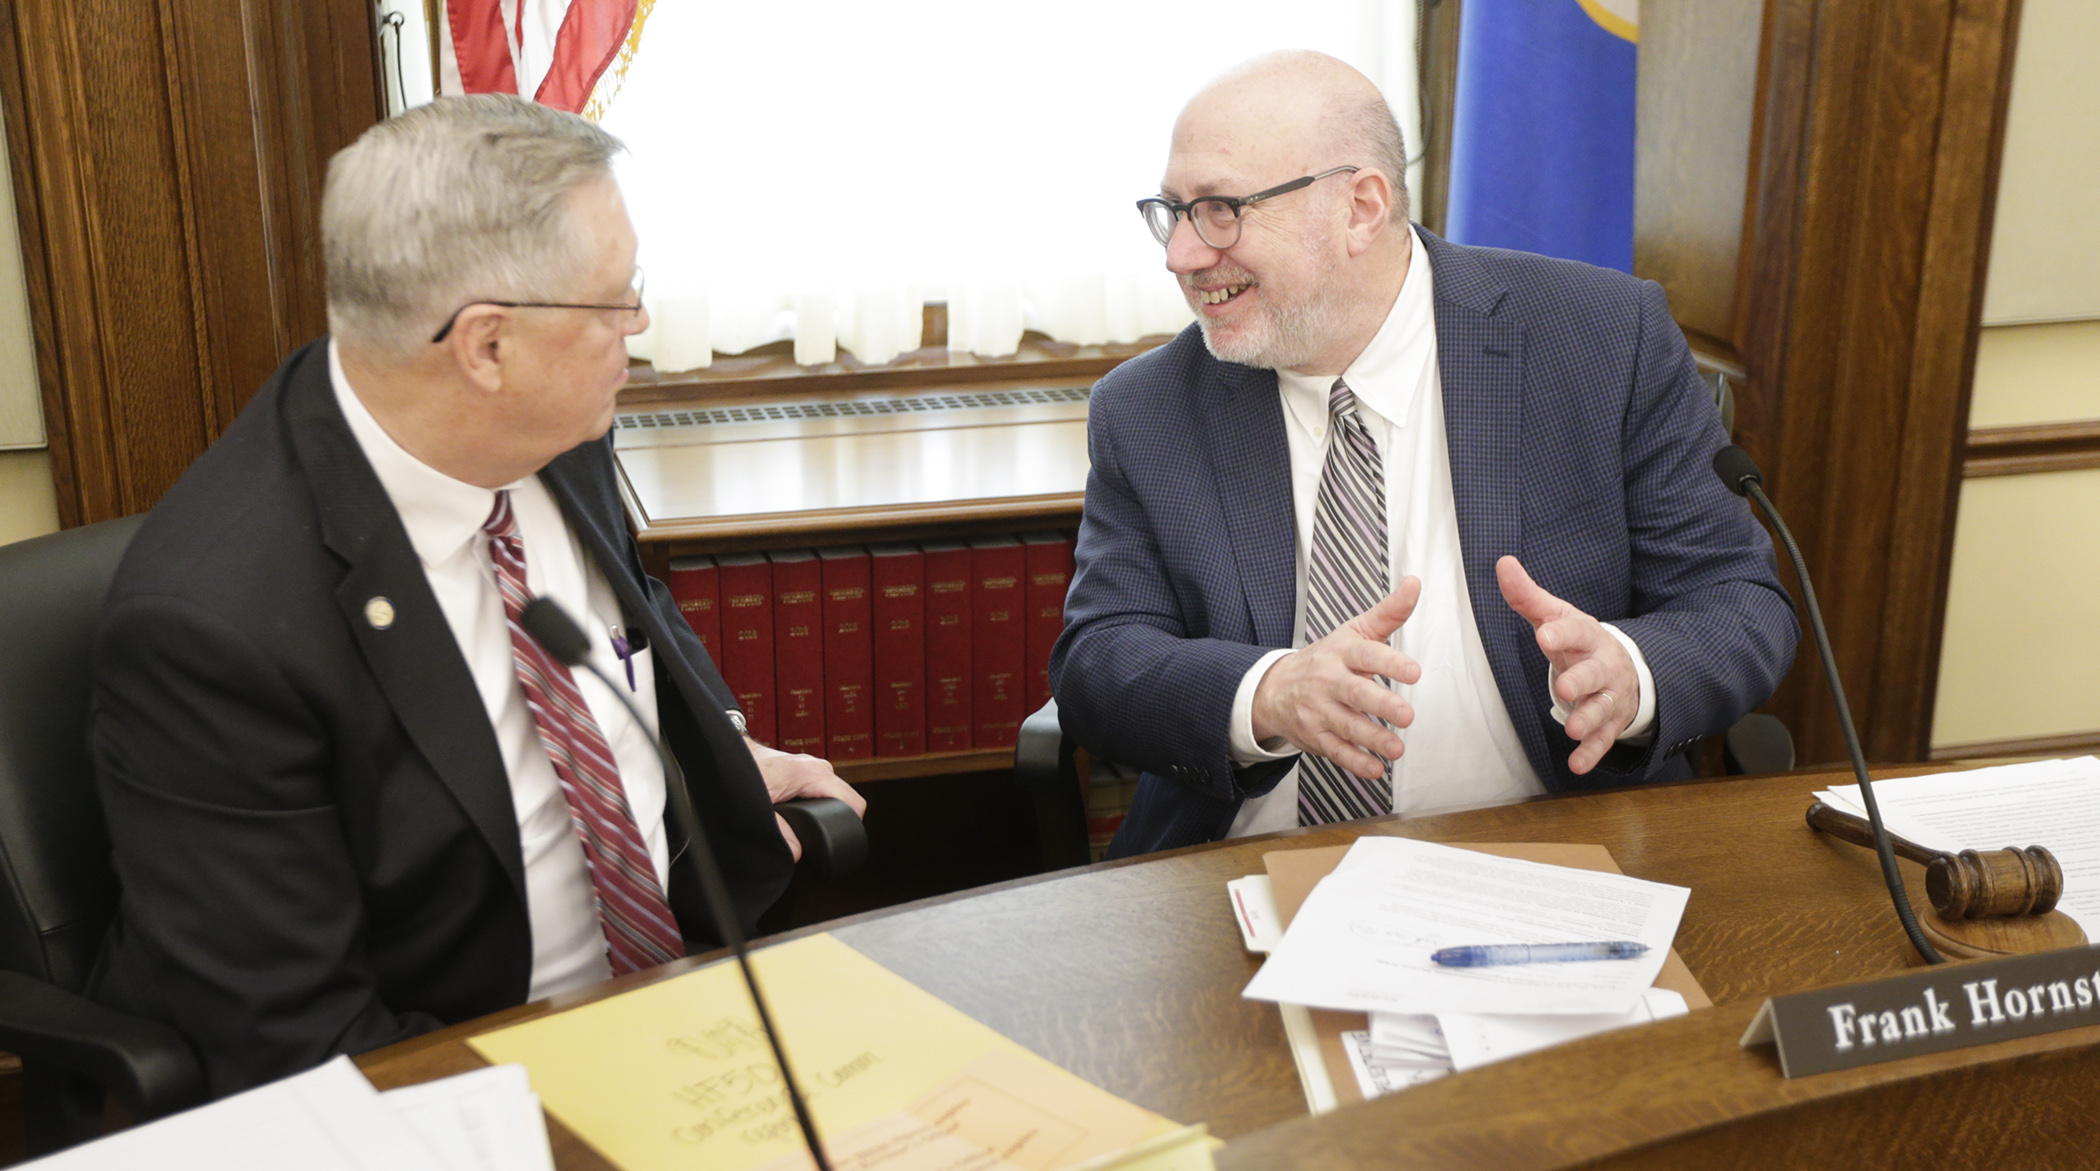 Rep. Frank Hornstein, right, and Sen. Scott Newman, co-chairs of the conference committee on HF50, confer after coming to an agreement and adopting the committee report. April 8. Photo by Paul Battaglia